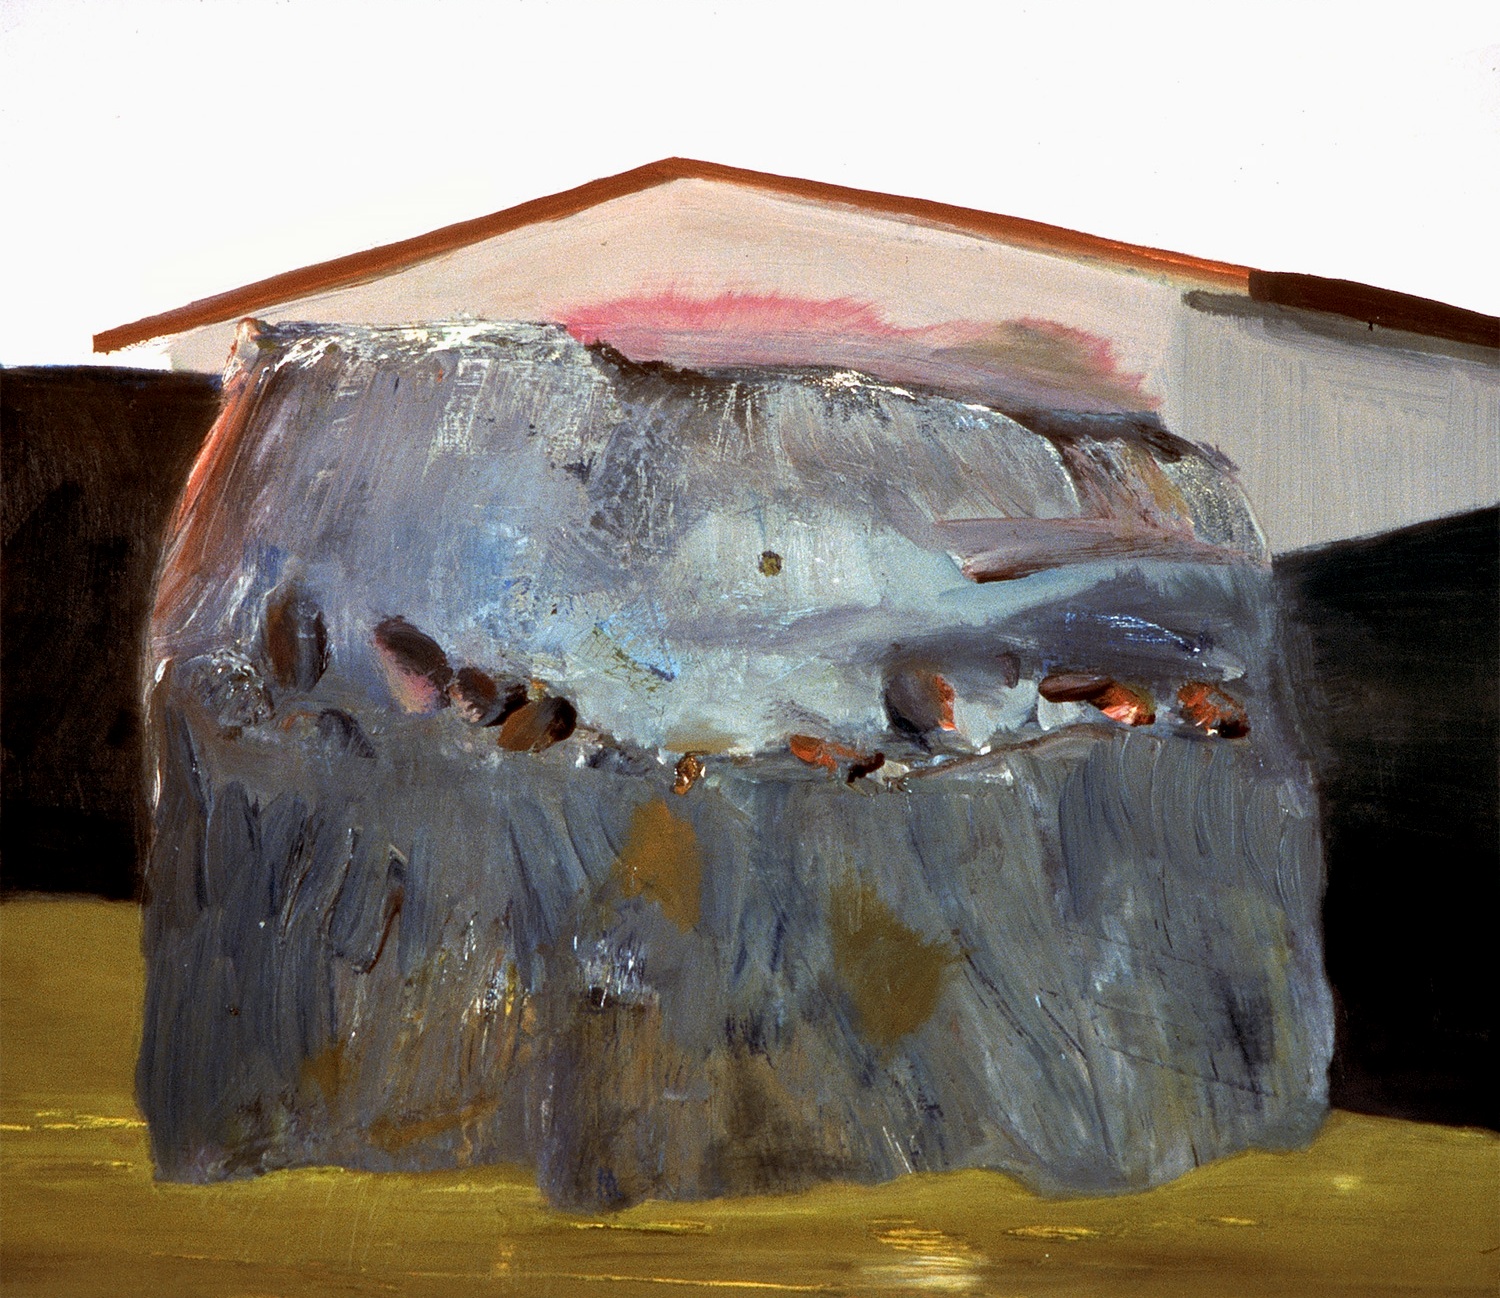   Molar , 2004, oil on canvas, 12 x 16 inches 